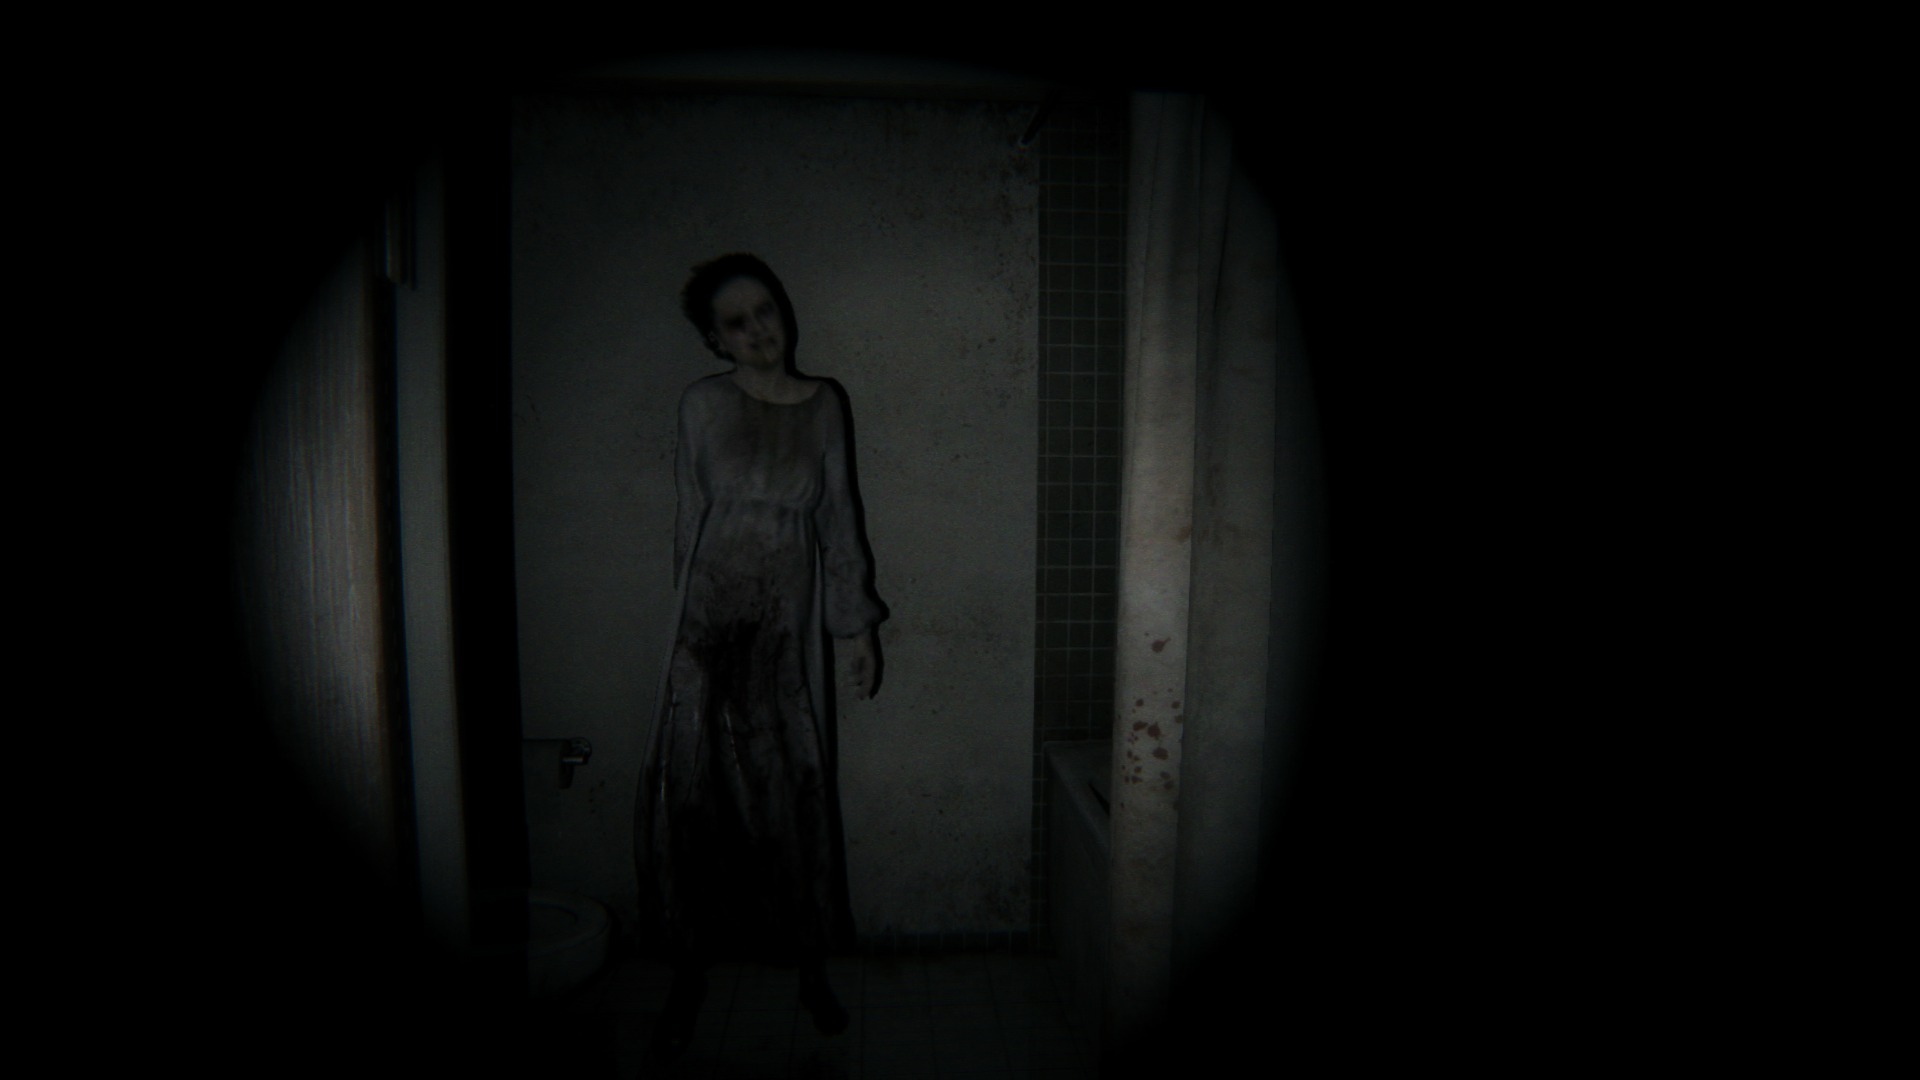 R.I.P P.T. – A Victim Of The Dangers Of Being Digital-Only